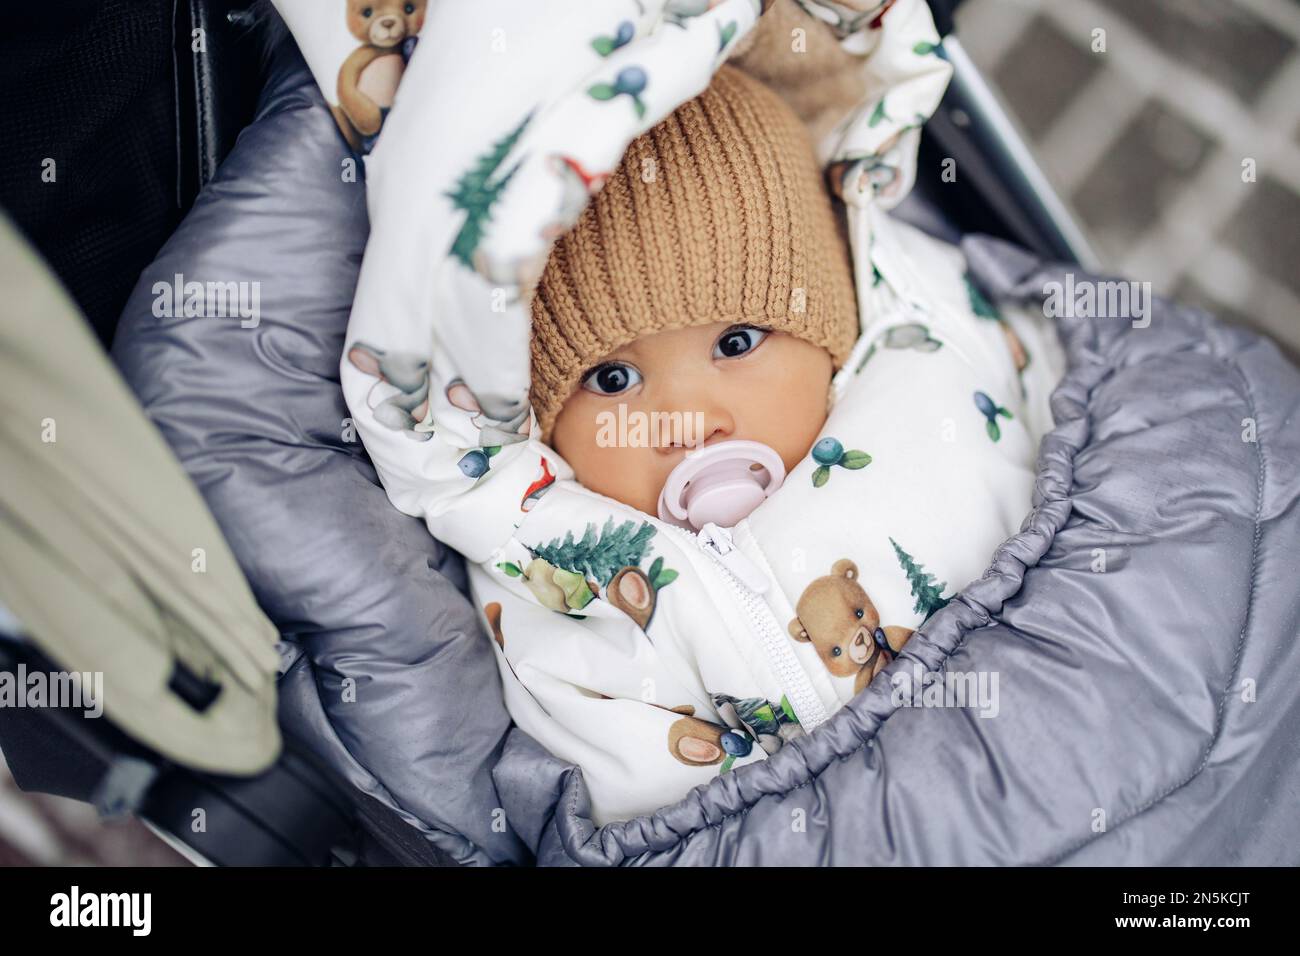 Dressed and wrapped infant from interracial marriage lies down in baby carriage during walk in winter. Concept of unity between different human races. Stock Photo